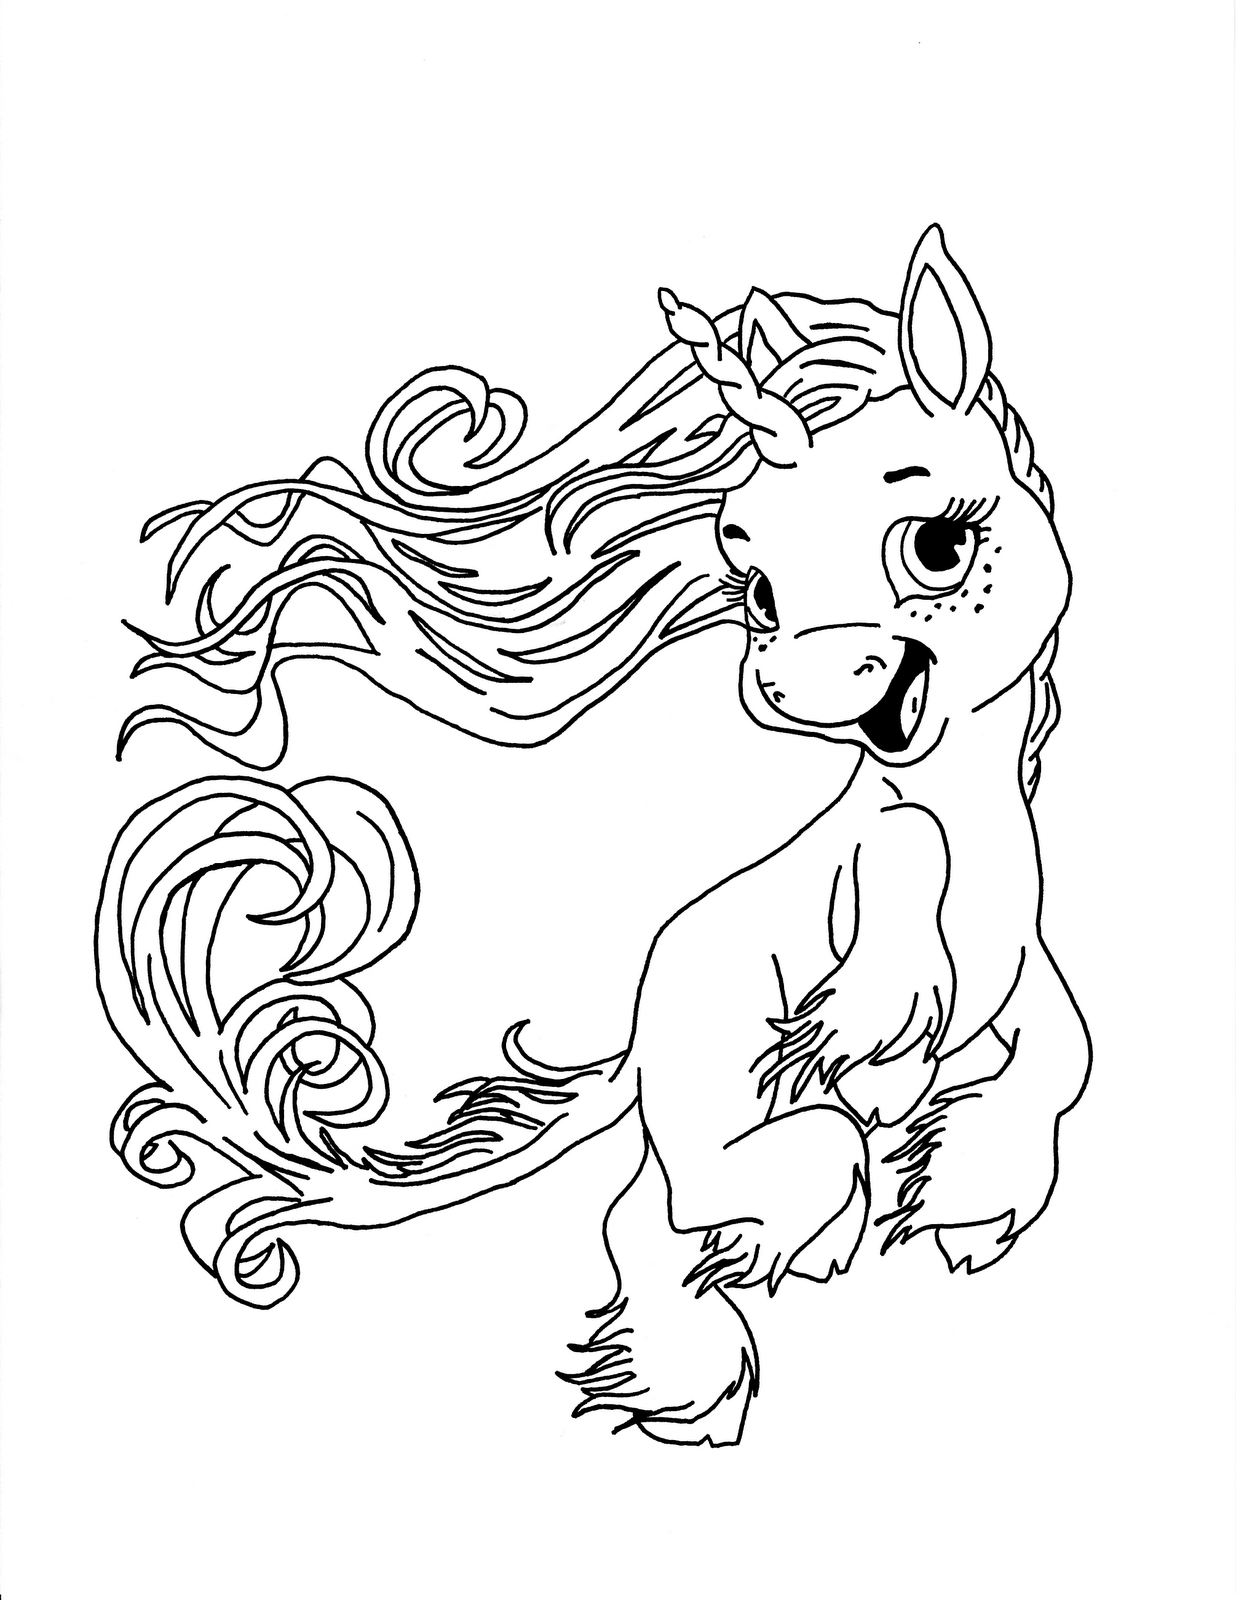 33 Best and Free Unicorn Coloring Pages Collections - VoteForVerde.com